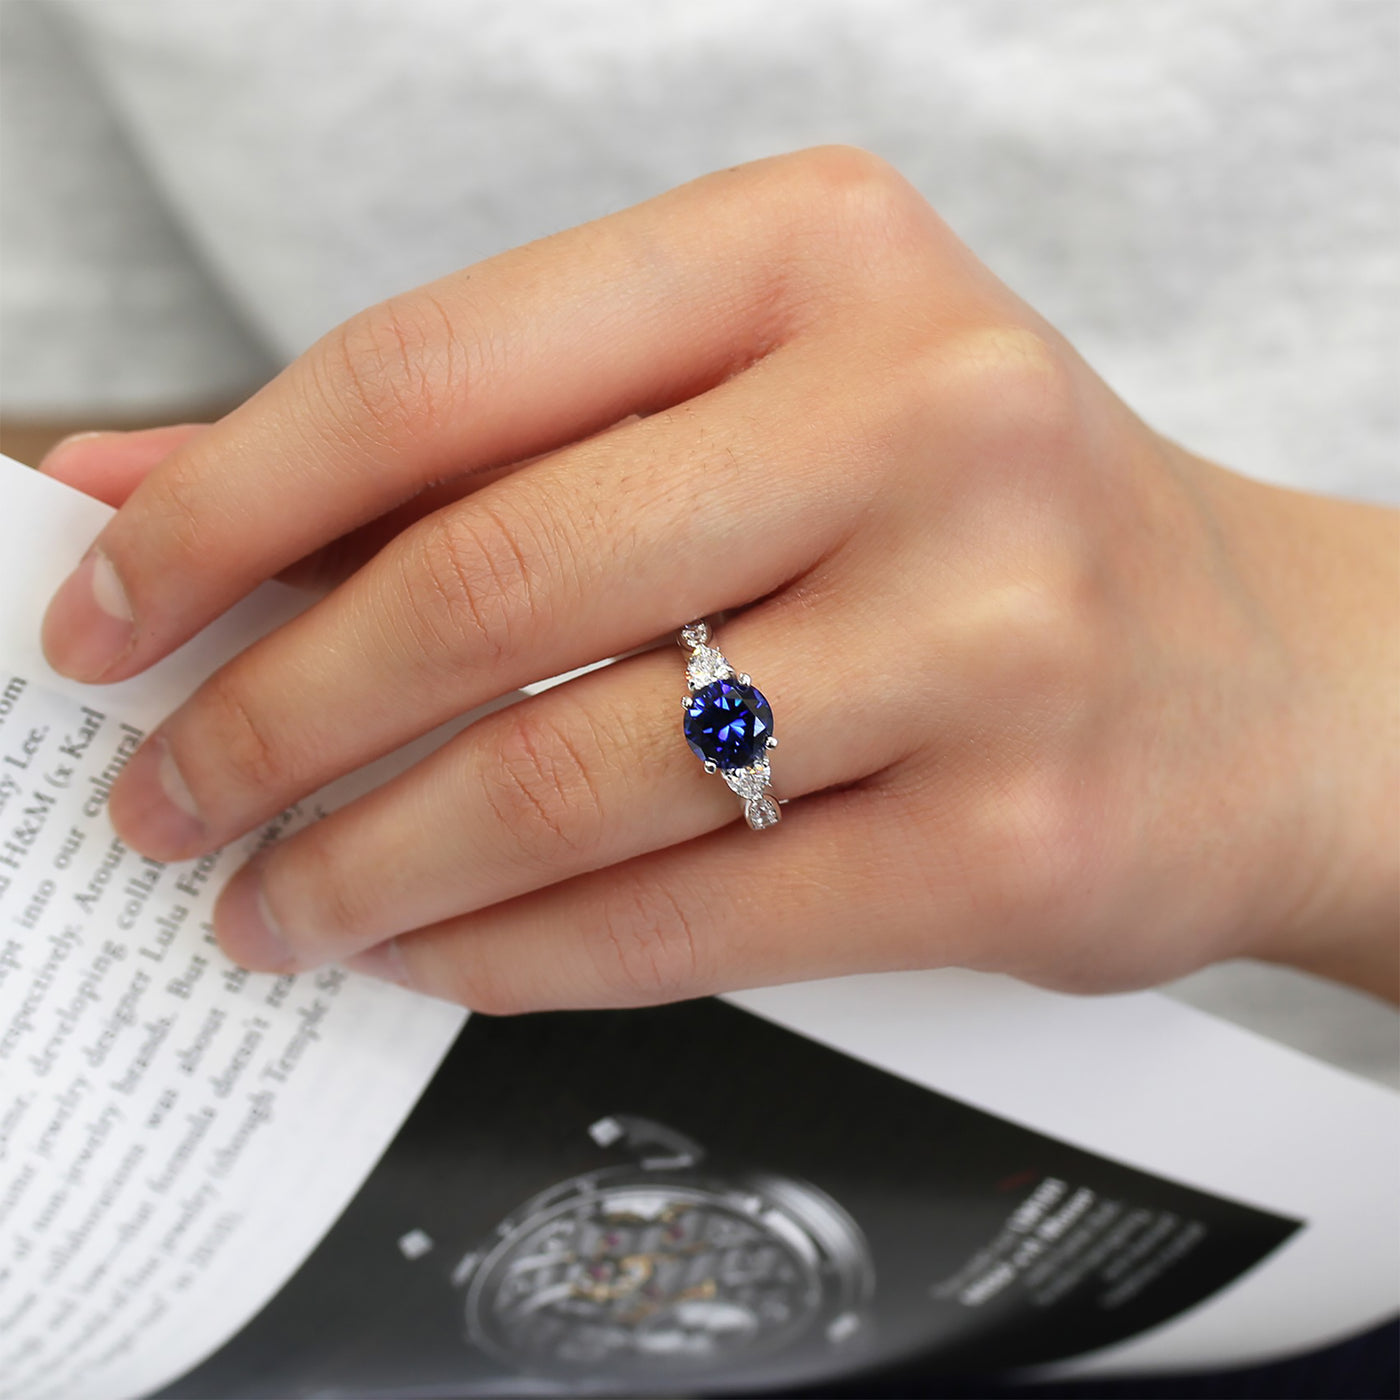 Brilliant 2 CT Simulated Blue Sapphire Ring, Platinum Plated Sterling Silver